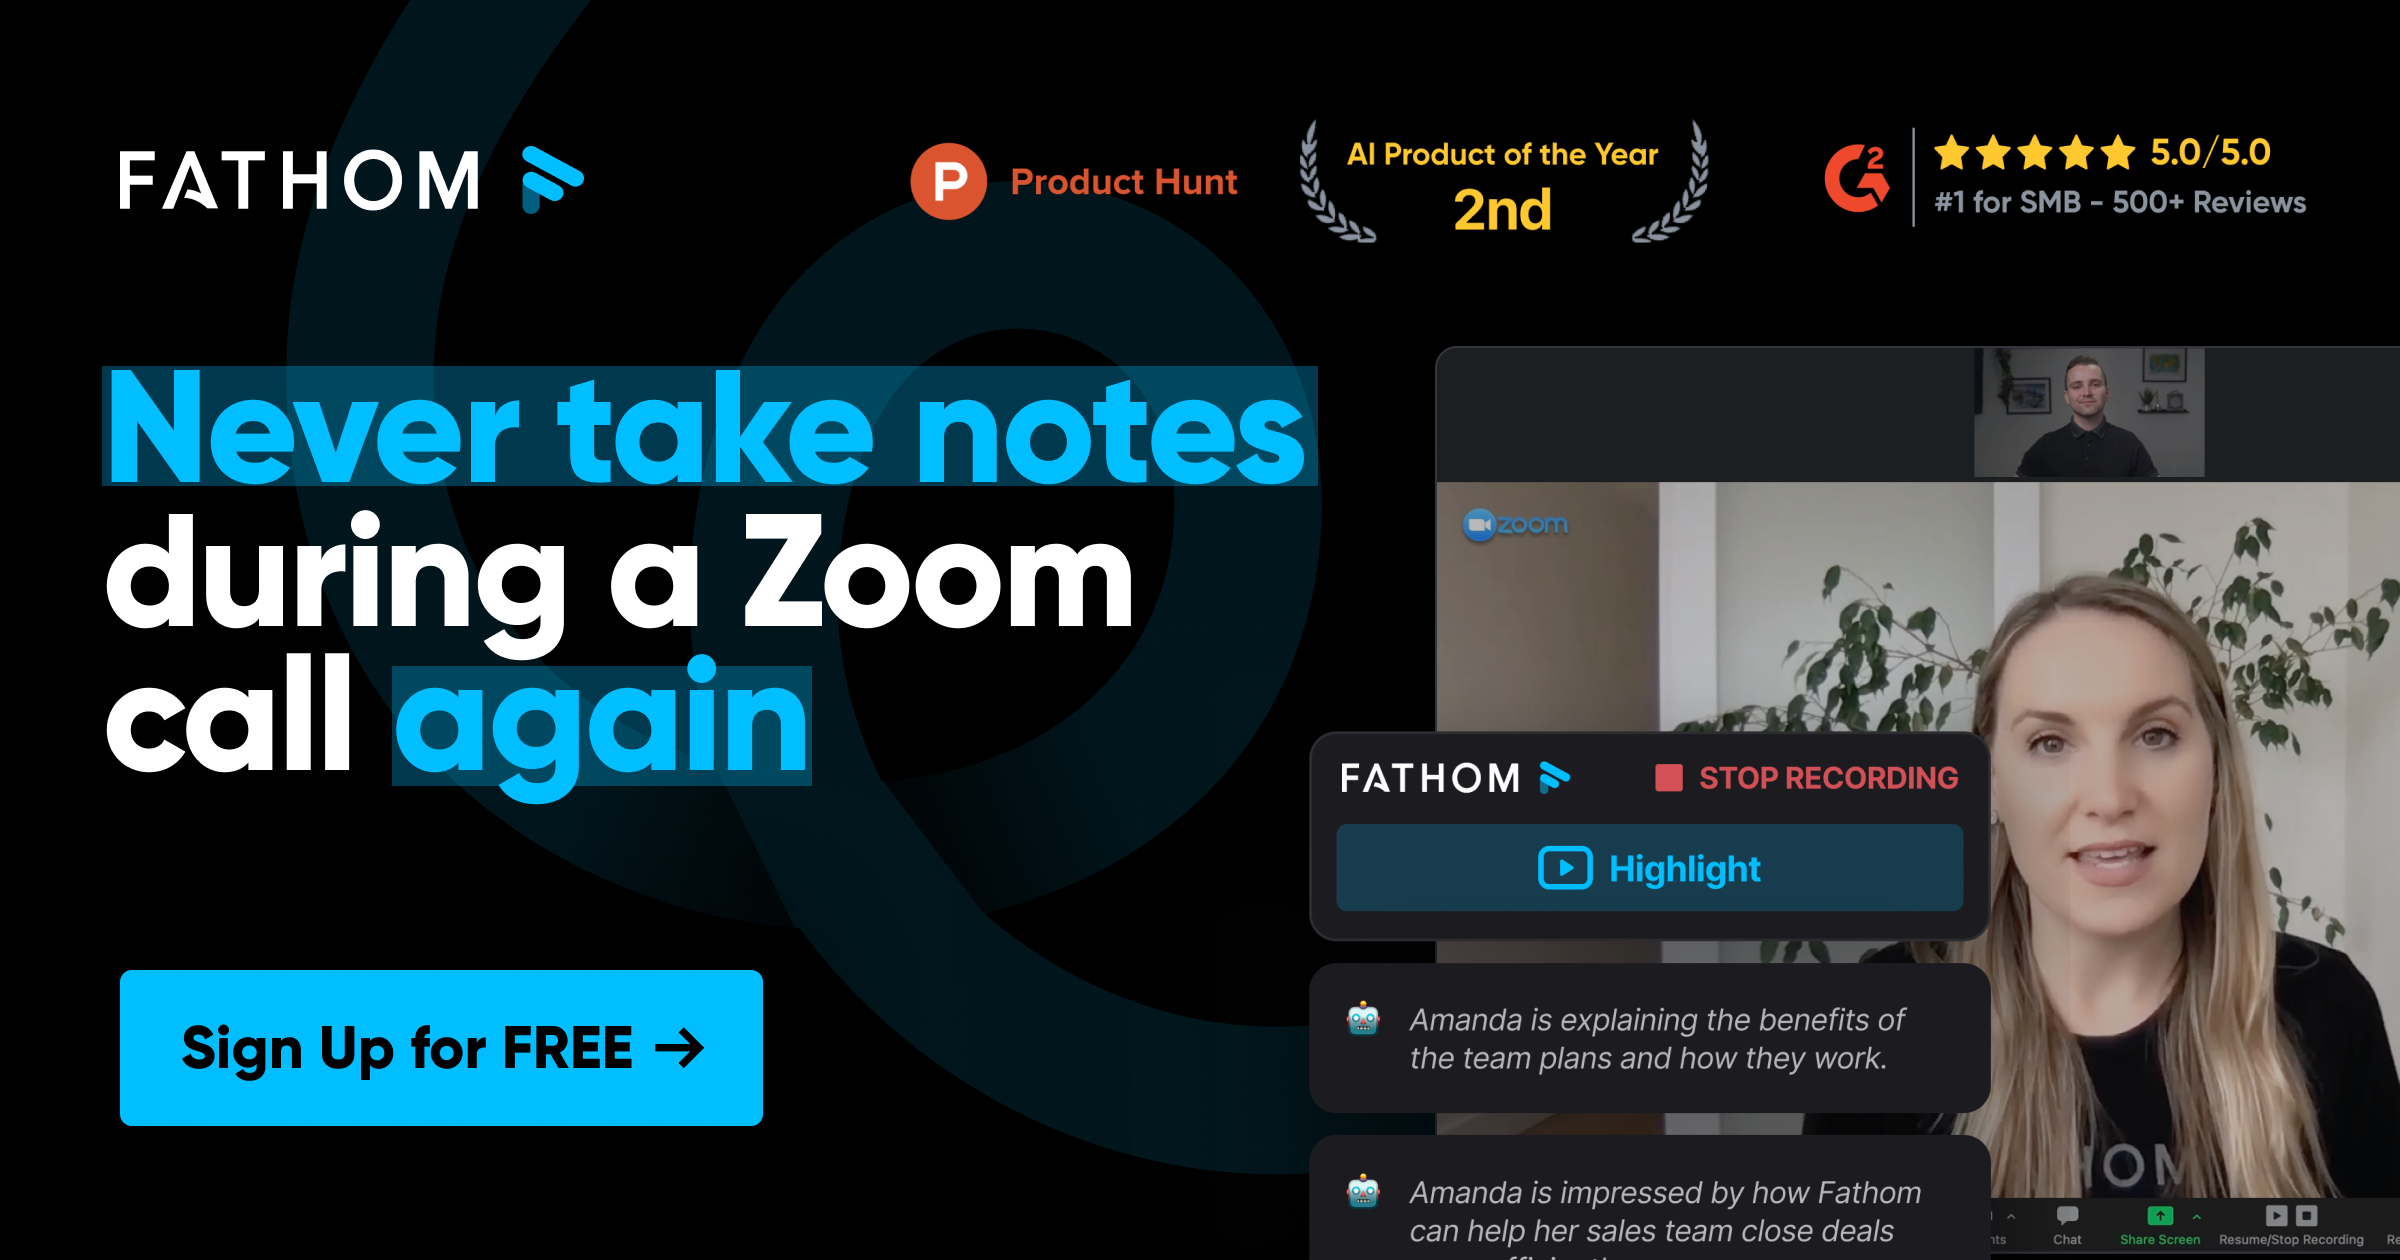 Fathom - Never take notes on a Zoom call again